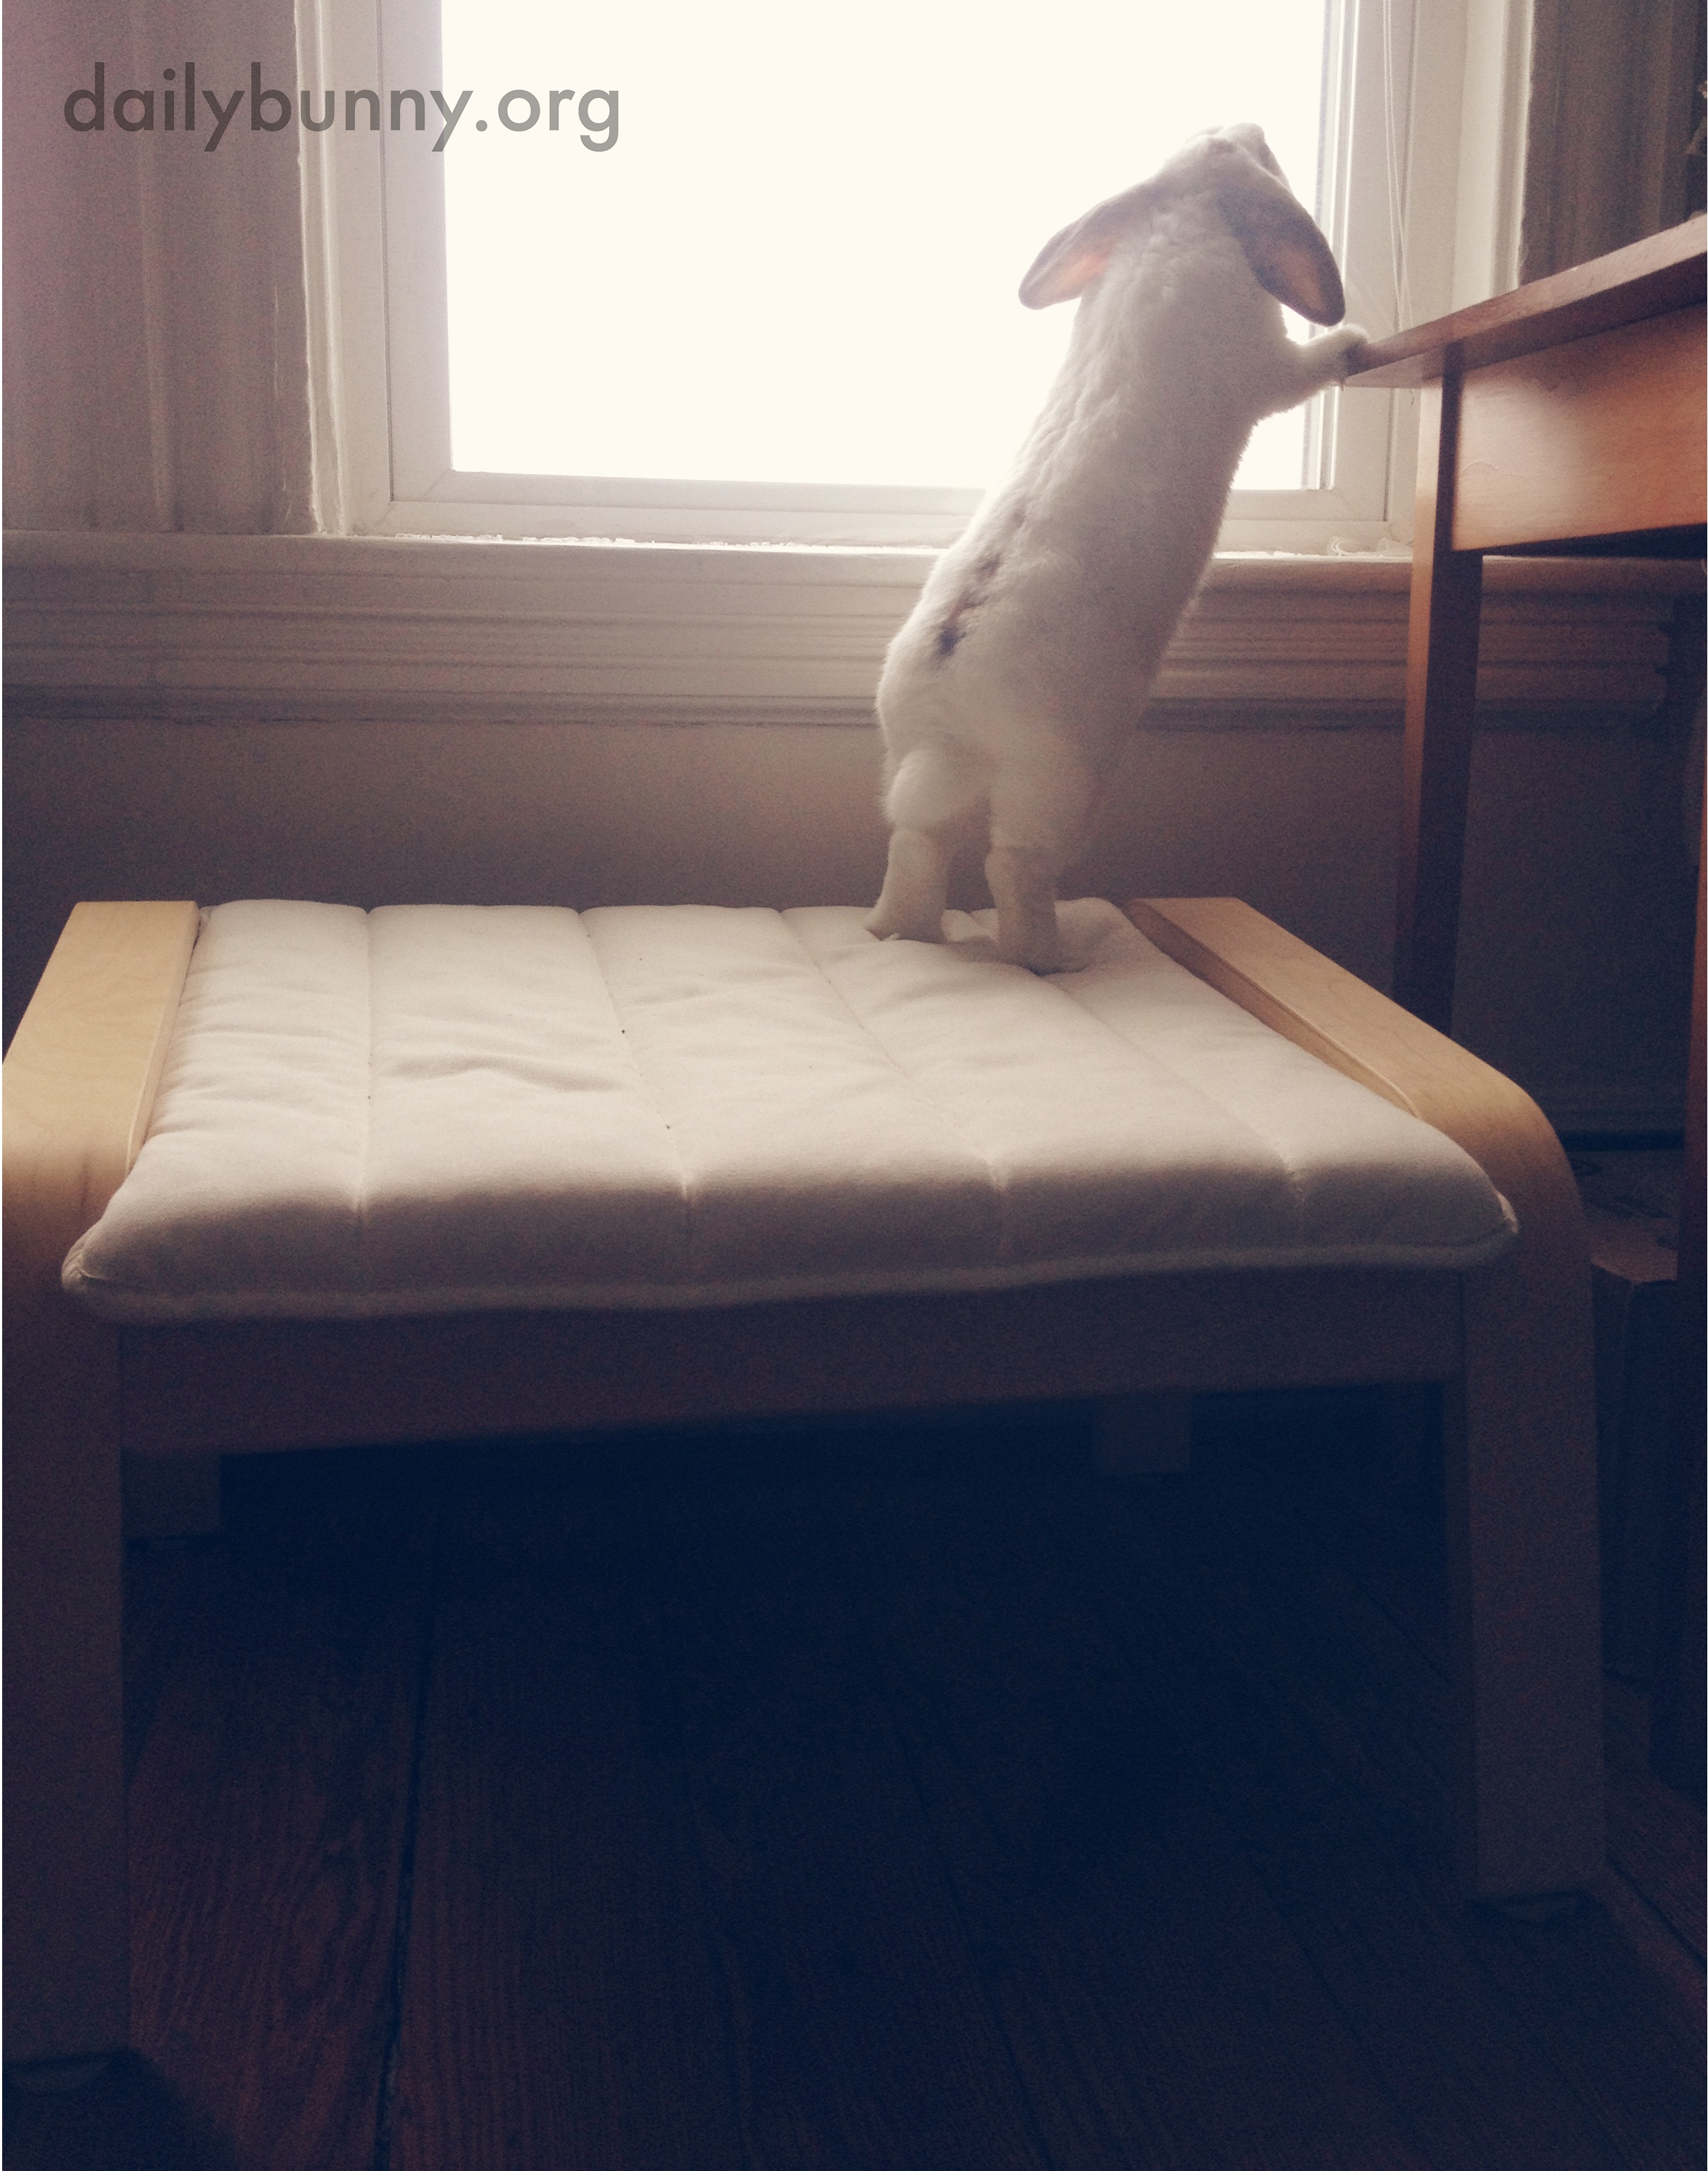 Bunny Is Curious About What's on the Other Side of the Window 2